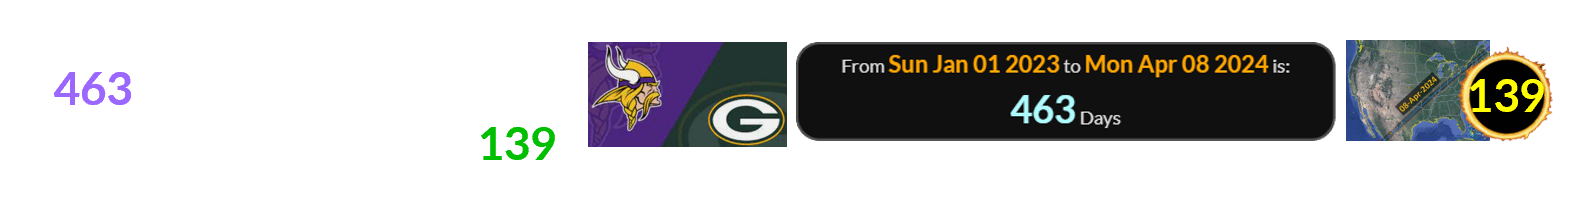 The Packers-Vikings game was 463 days before the next Total eclipse from Saros # 139: